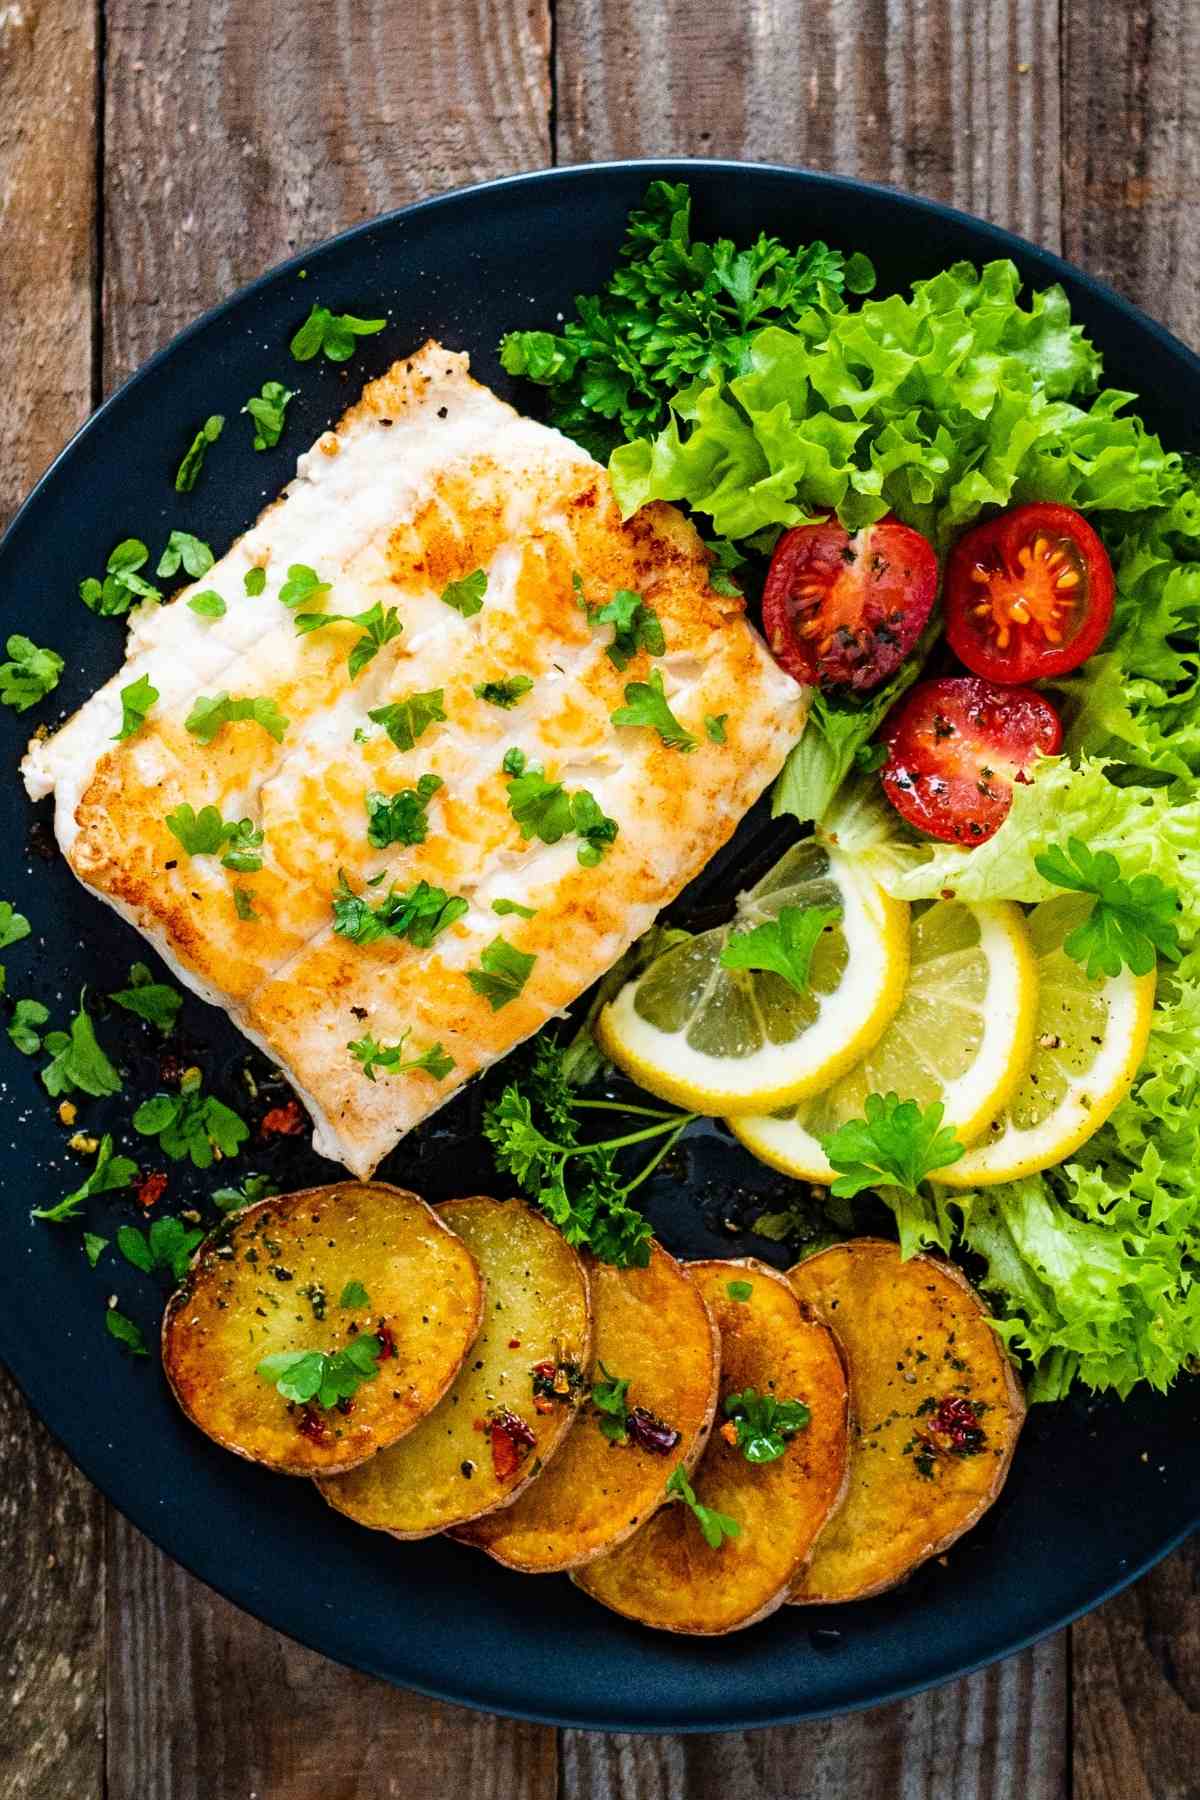 This Broiled Cod is delicately seasoned with butter, garlic, lemon juice, lemon zest, and fresh parsley. It comes together in just 20 minutes, making it ideal for busy weeknights.